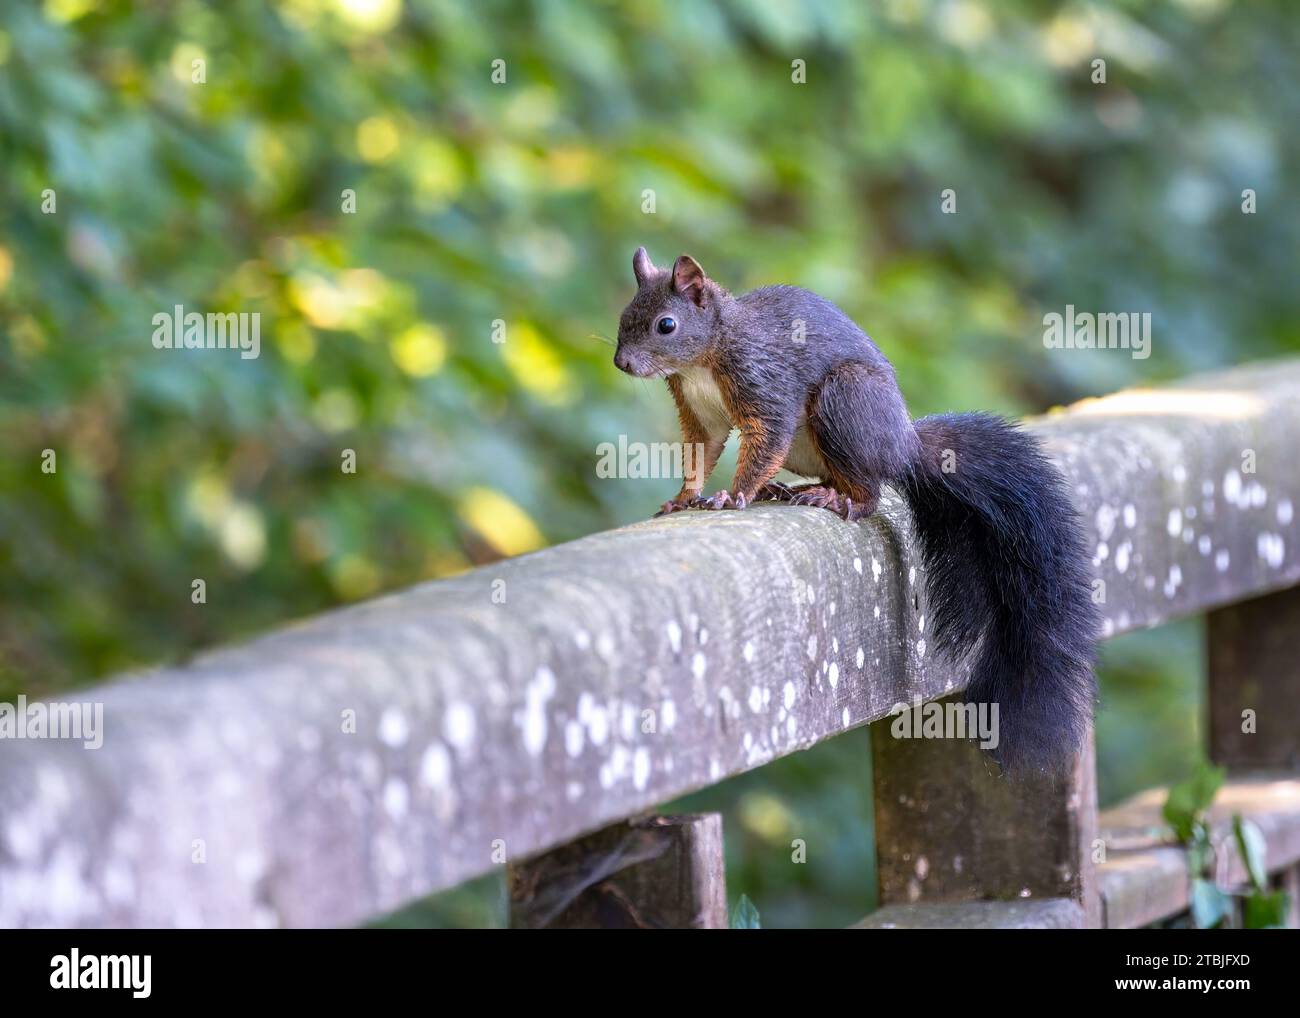 Closeup of a squirrel sitting on a wooden fence Stock Photo